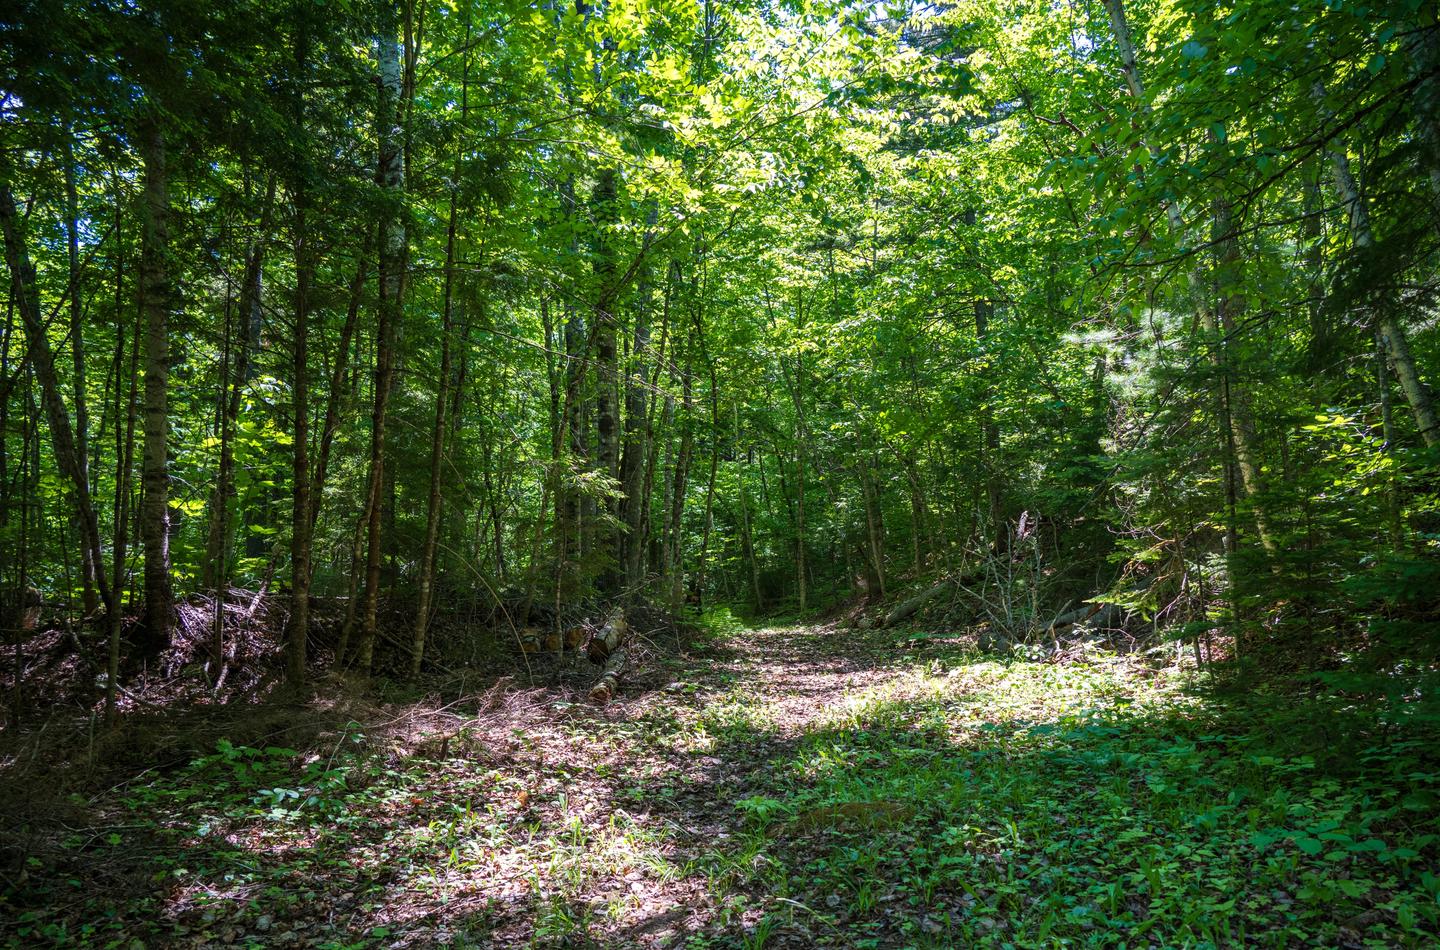 The IAT (a dirt and gravel trail) travels past the campsite and through the shaded woods.Grand Pitch Lean-to campsite is located next to the IAT, making it a convenient campsite while traveling on the IAT.